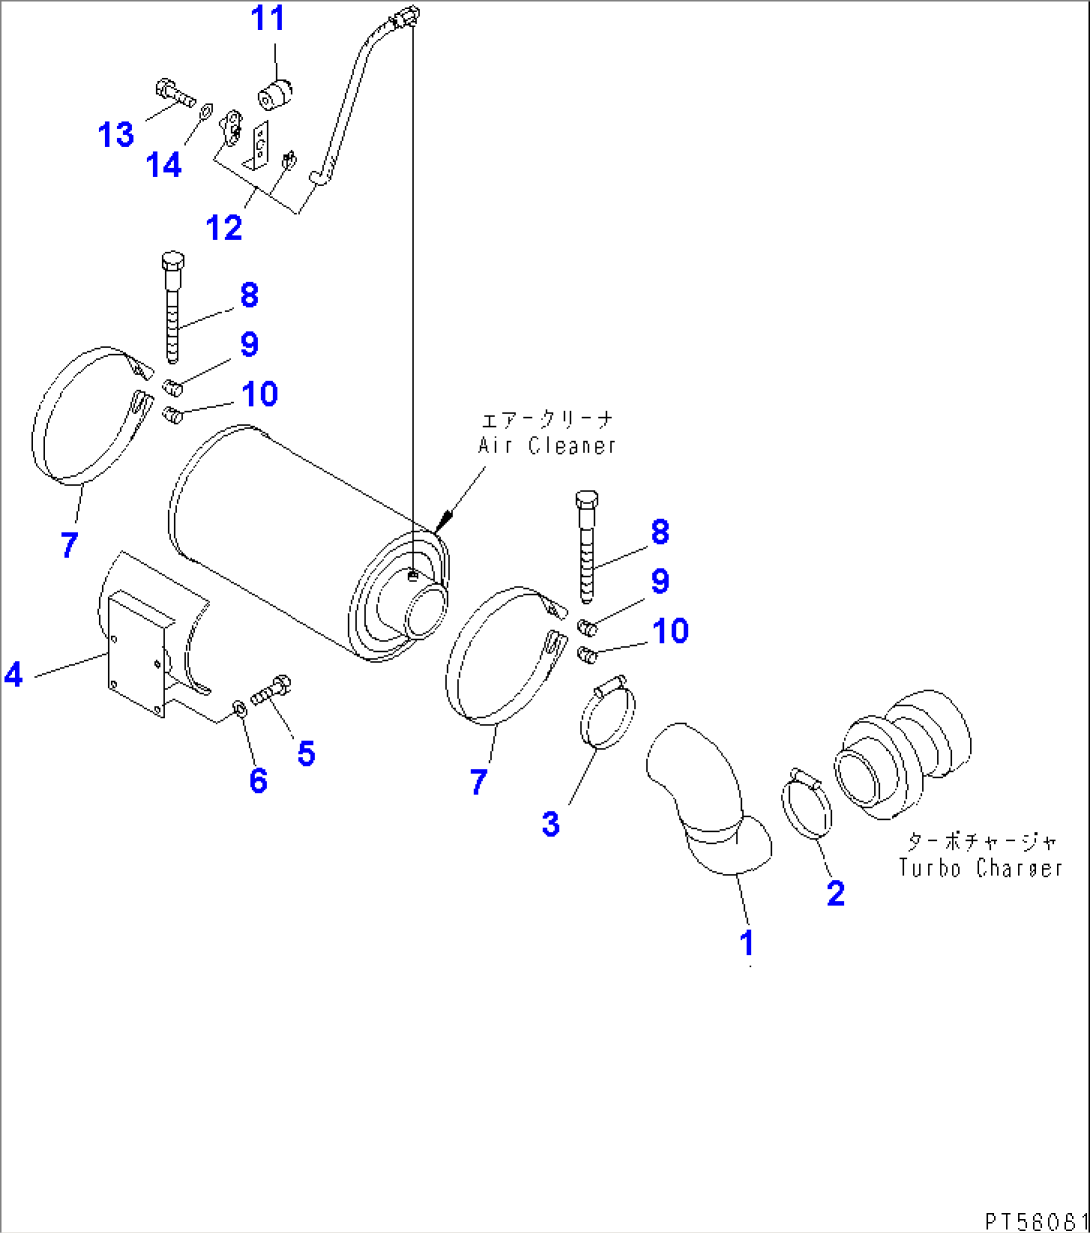 AIR CLEANER CONNECTION PARTS